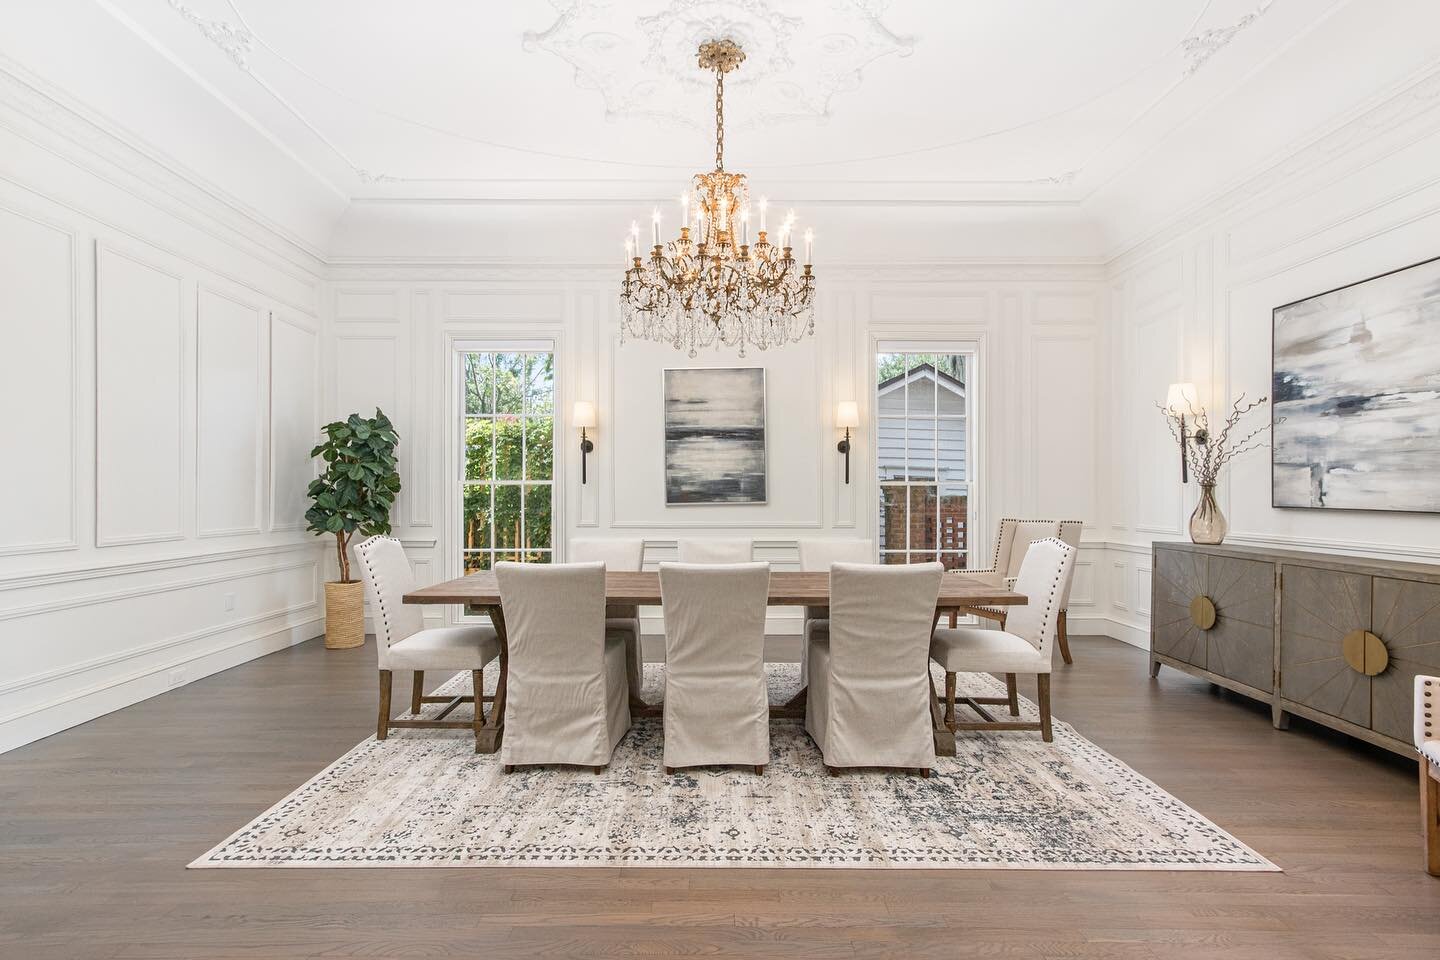 We will reinstate the tradition of Sunday dinners for the sole purpose of utilizing this amazing dining room!

We have luxury dining sets that can help complete the look of your beautiful listing! Contact us for details on furniture rental opportunit